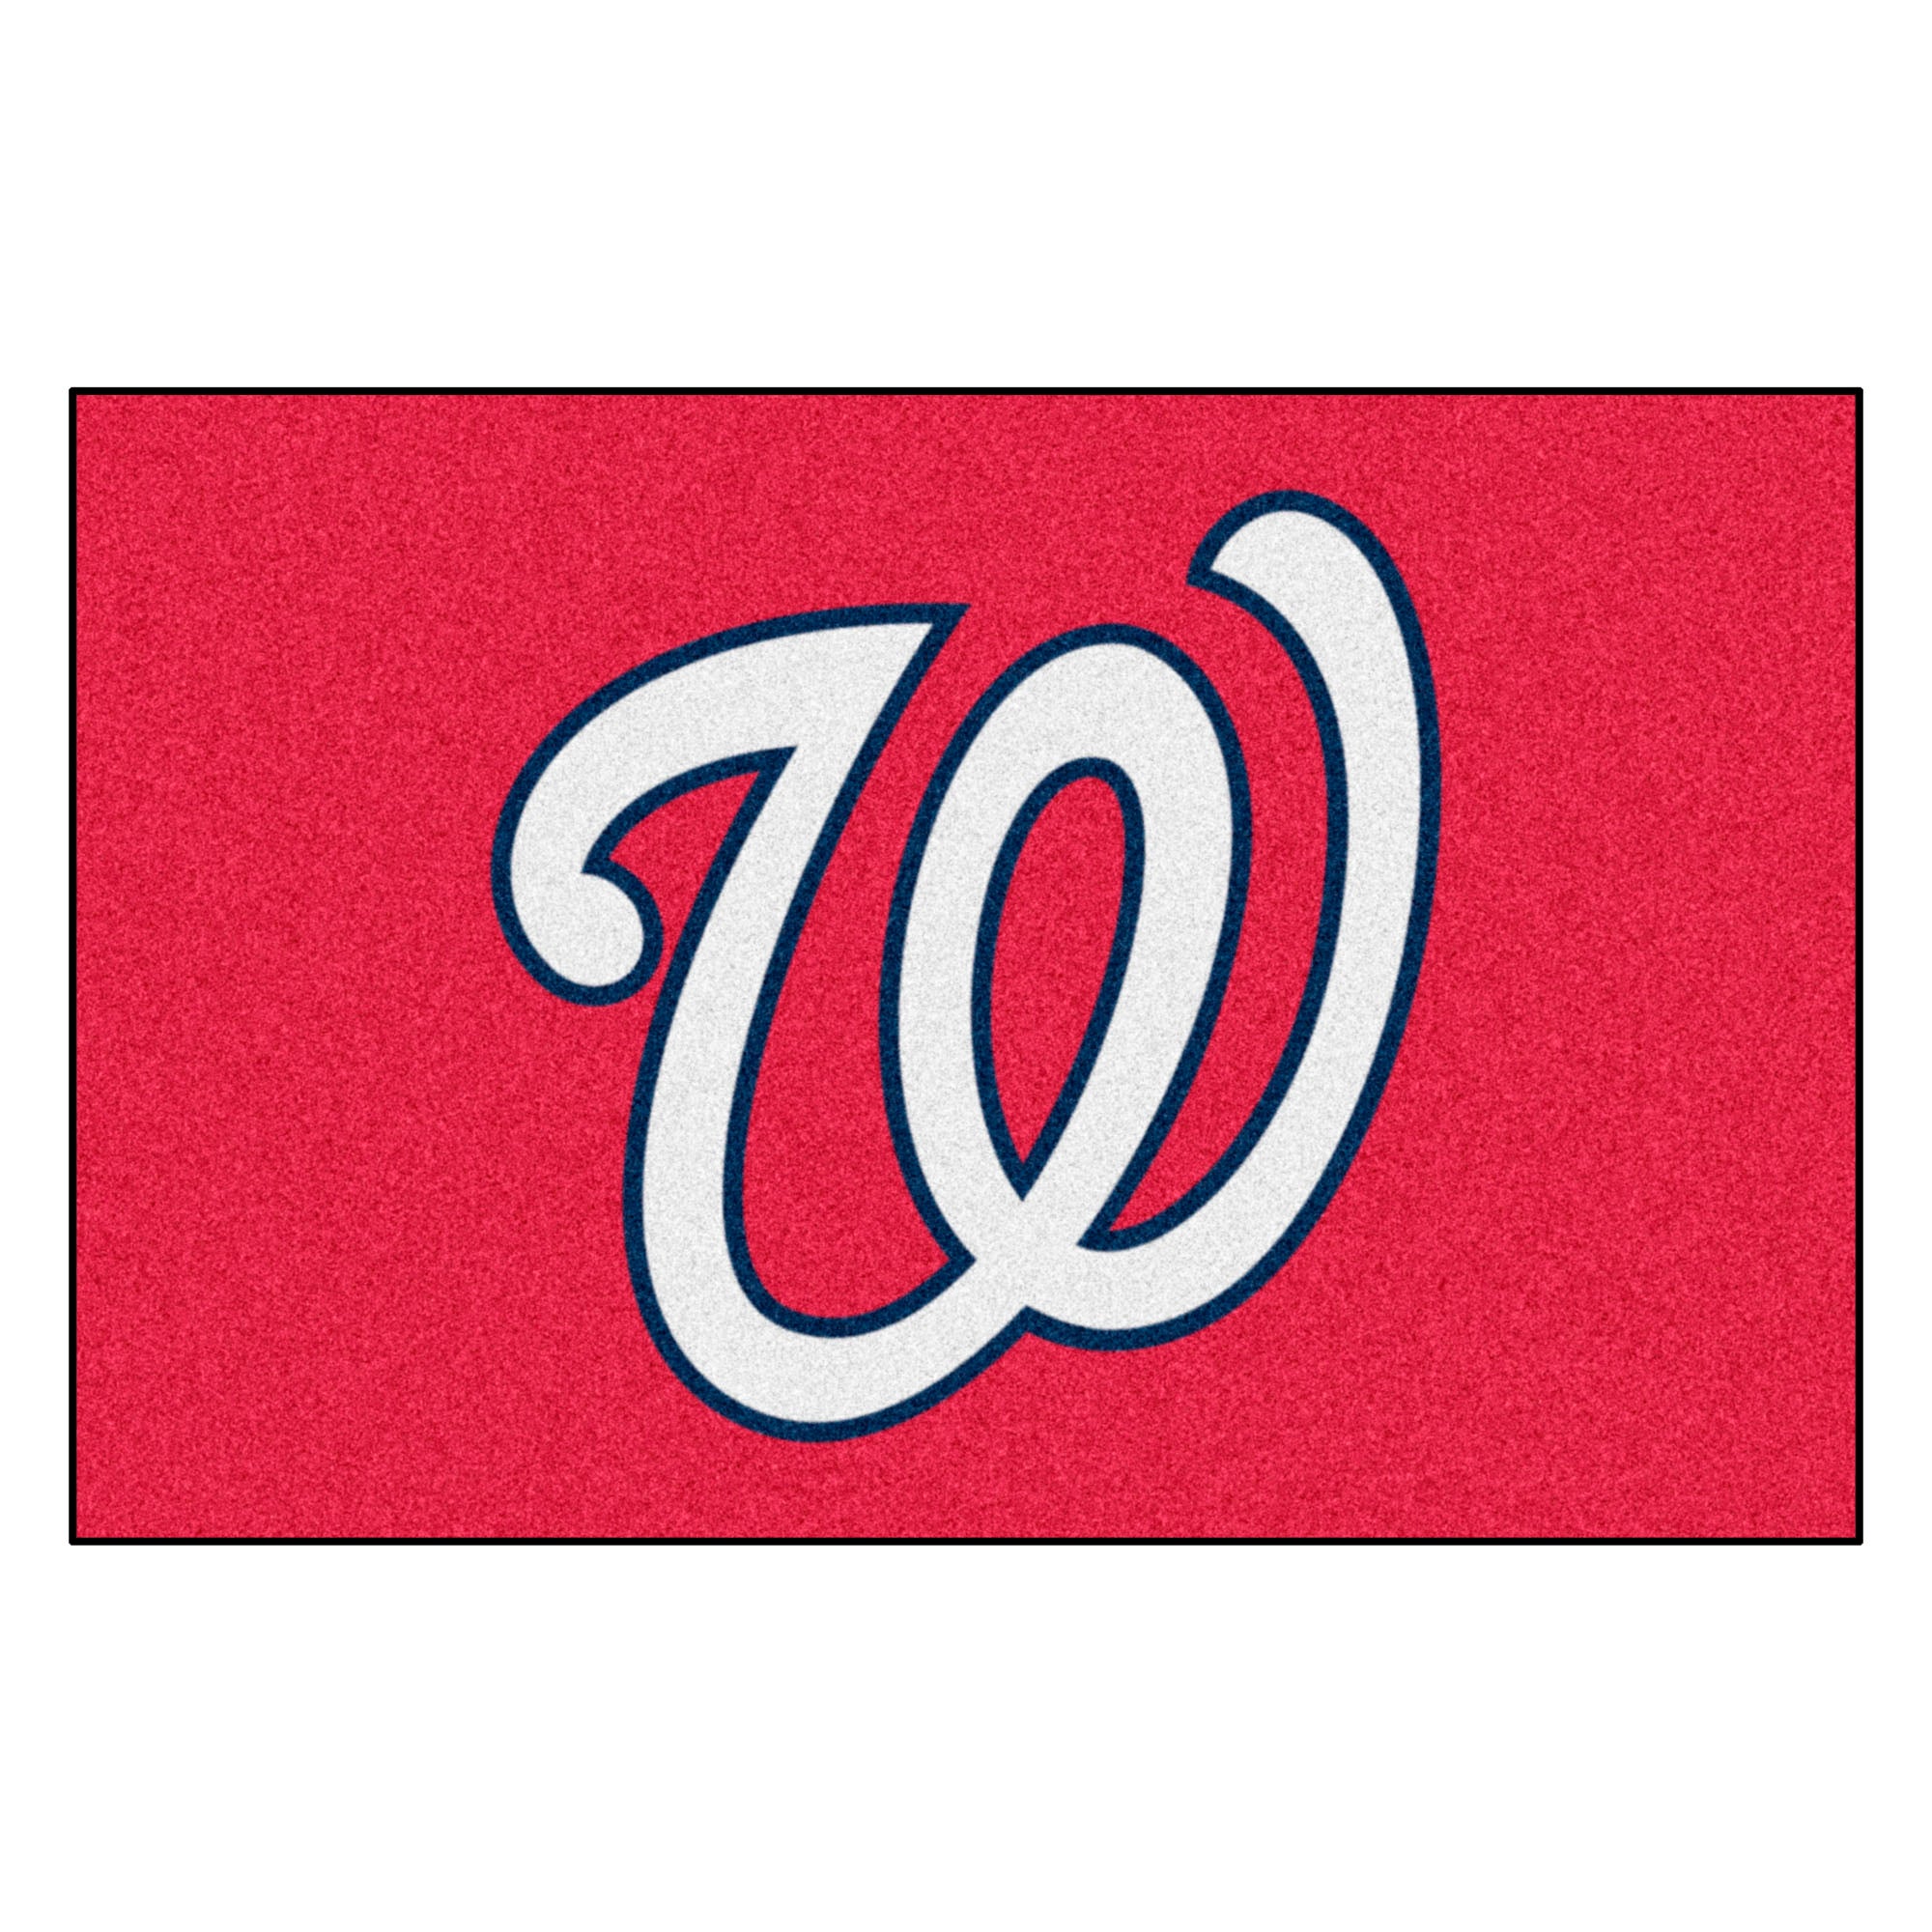 FANMATS, MLB - Washington Nationals Rug - 19in. x 30in.